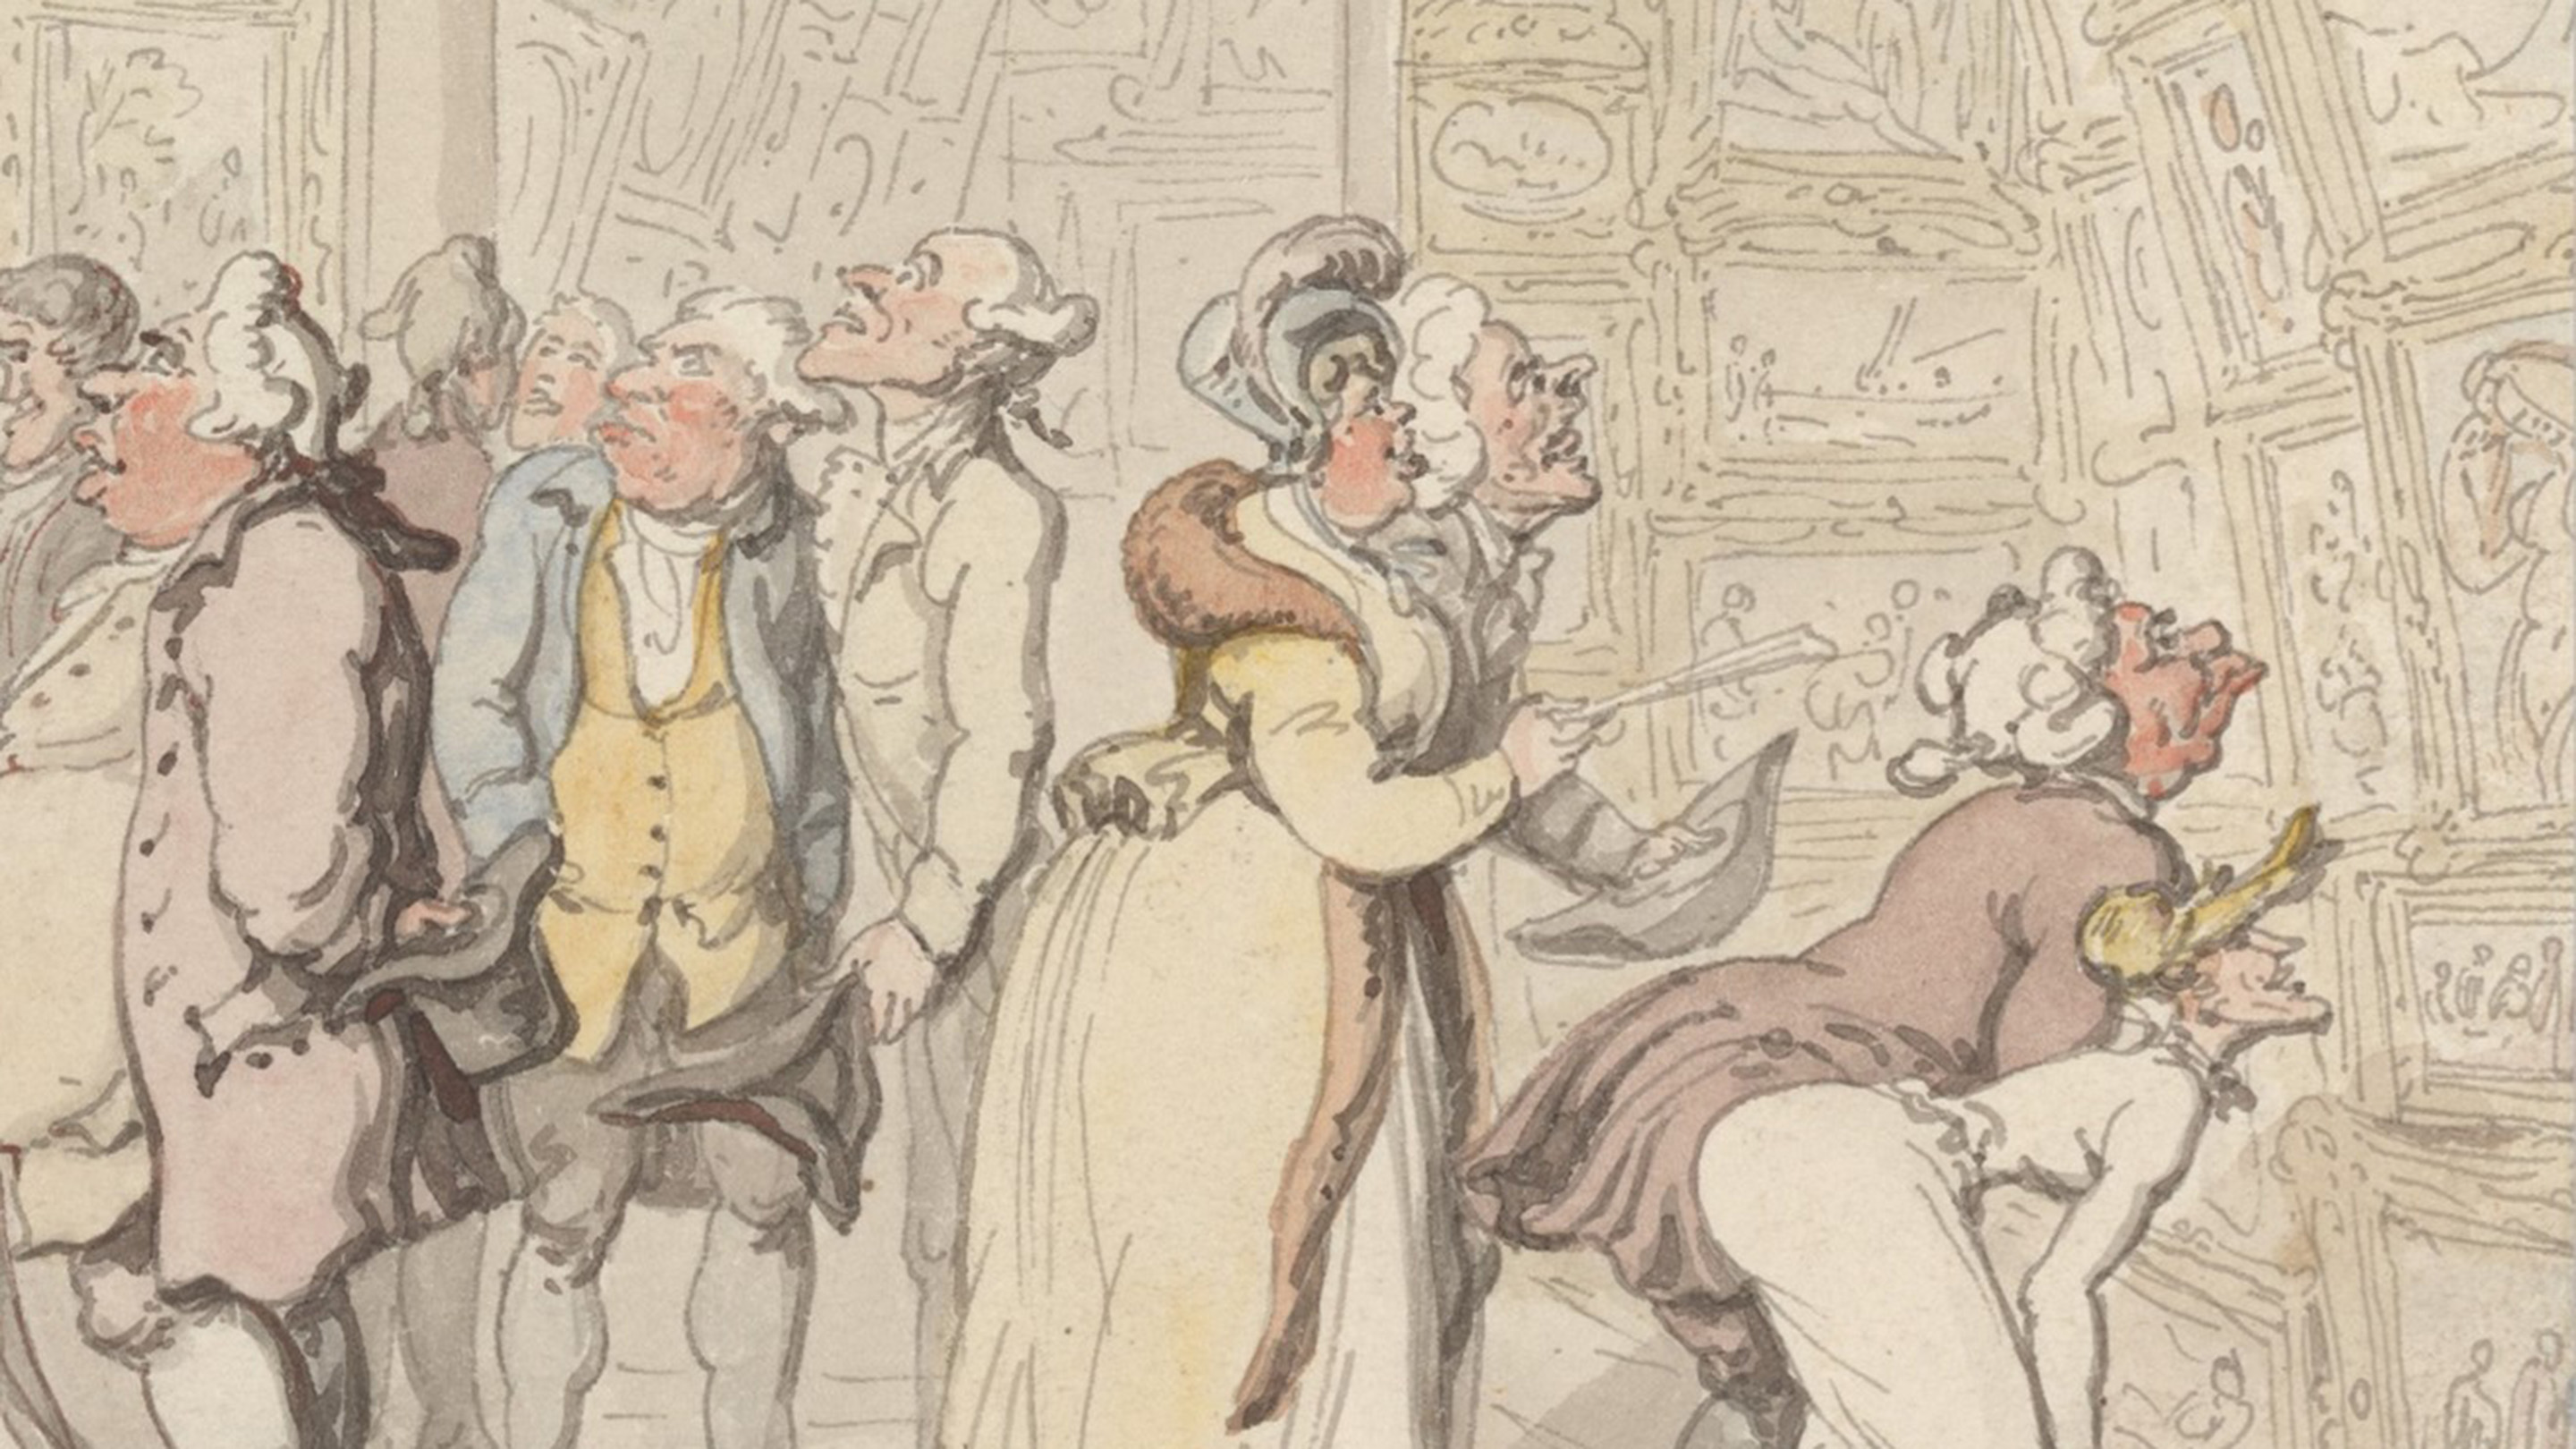 Thomas Rowlandson, Viewing at the Royal Academy, c.1815. Yale Center for British Art, Paul Mellon Collection. The Bridgeman Art Library (part.)